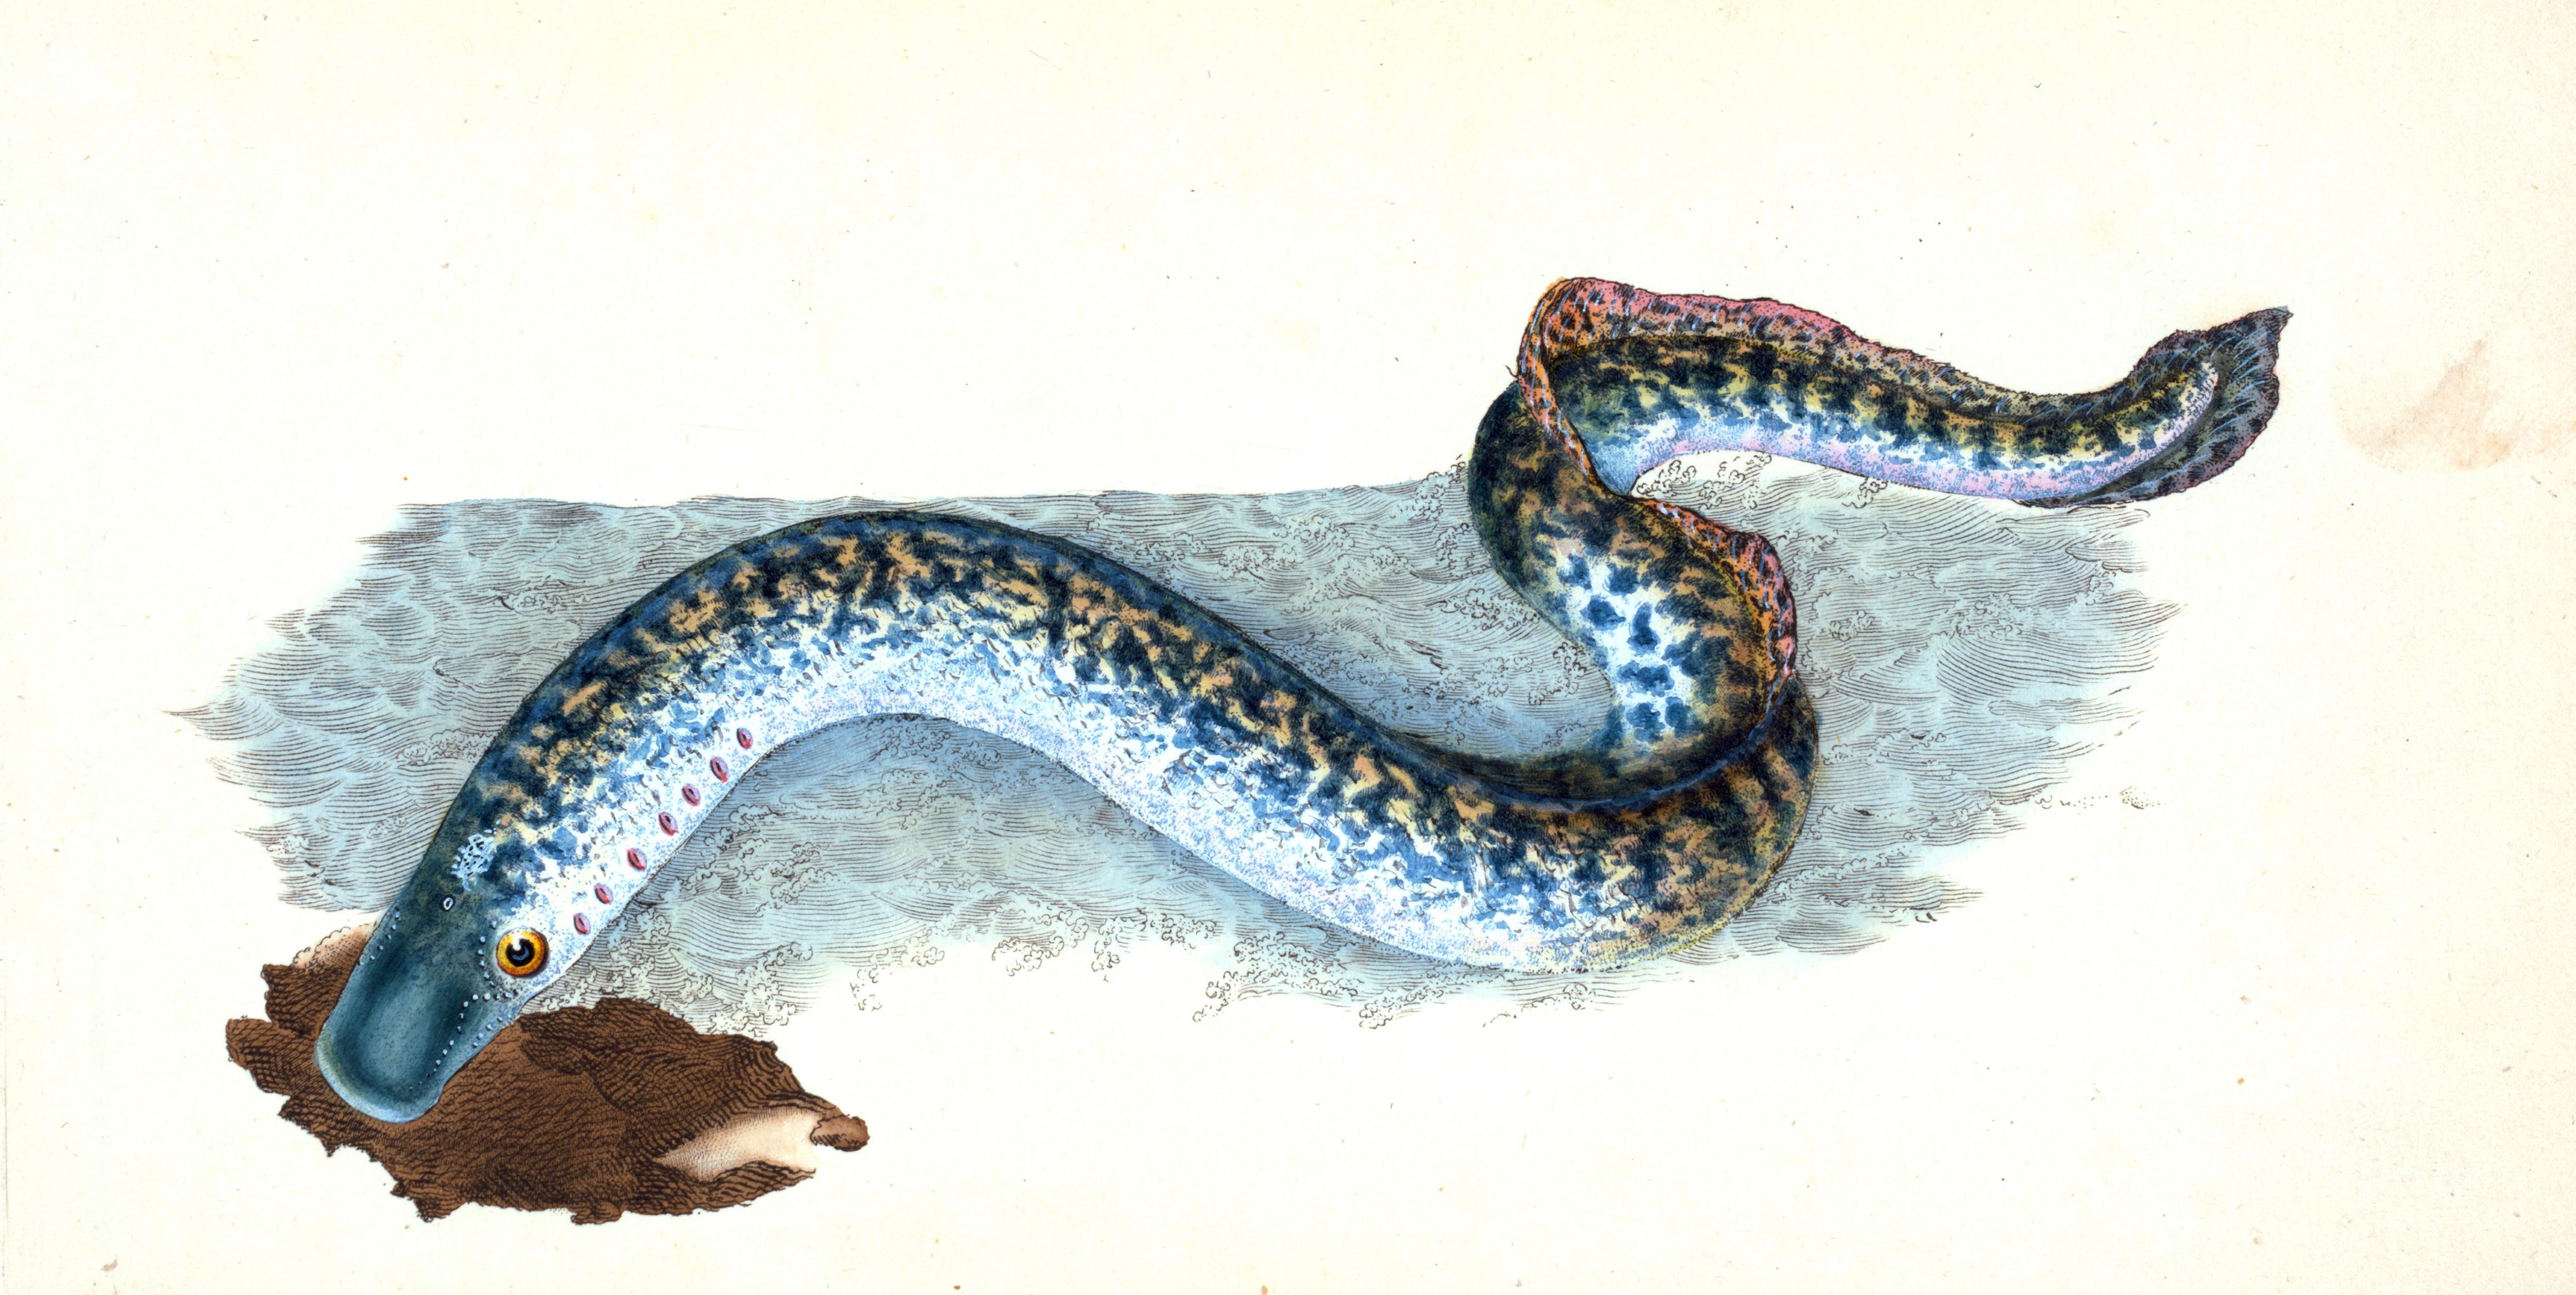 An illustration of a great, or sea, lamprey